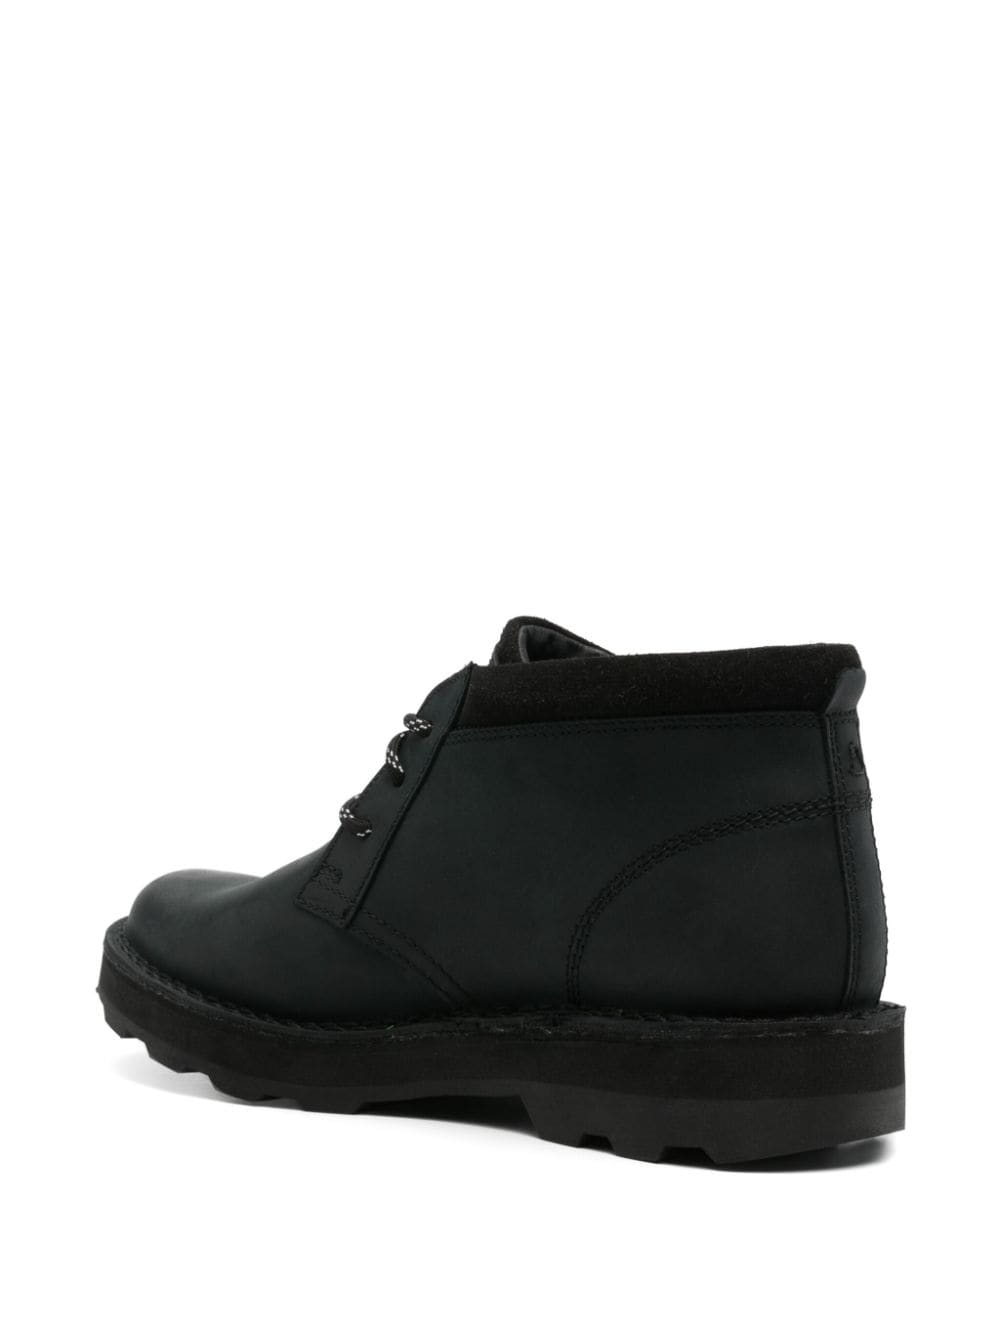 Clarks Corston DB WP leather boots Black